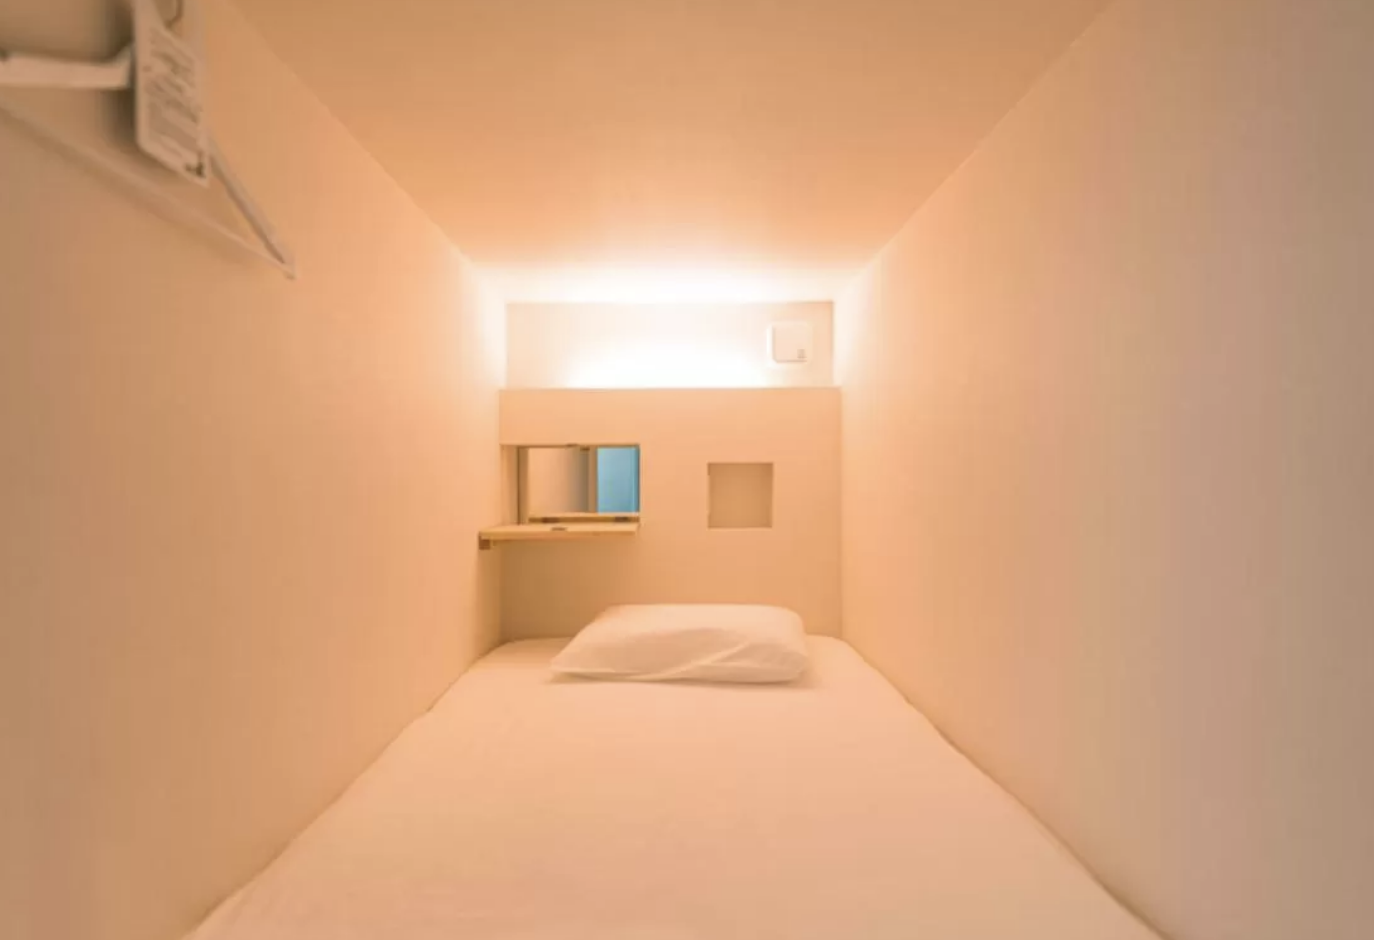 11 coolest capsule hotels in tokyo [ For any Type of Traveler]